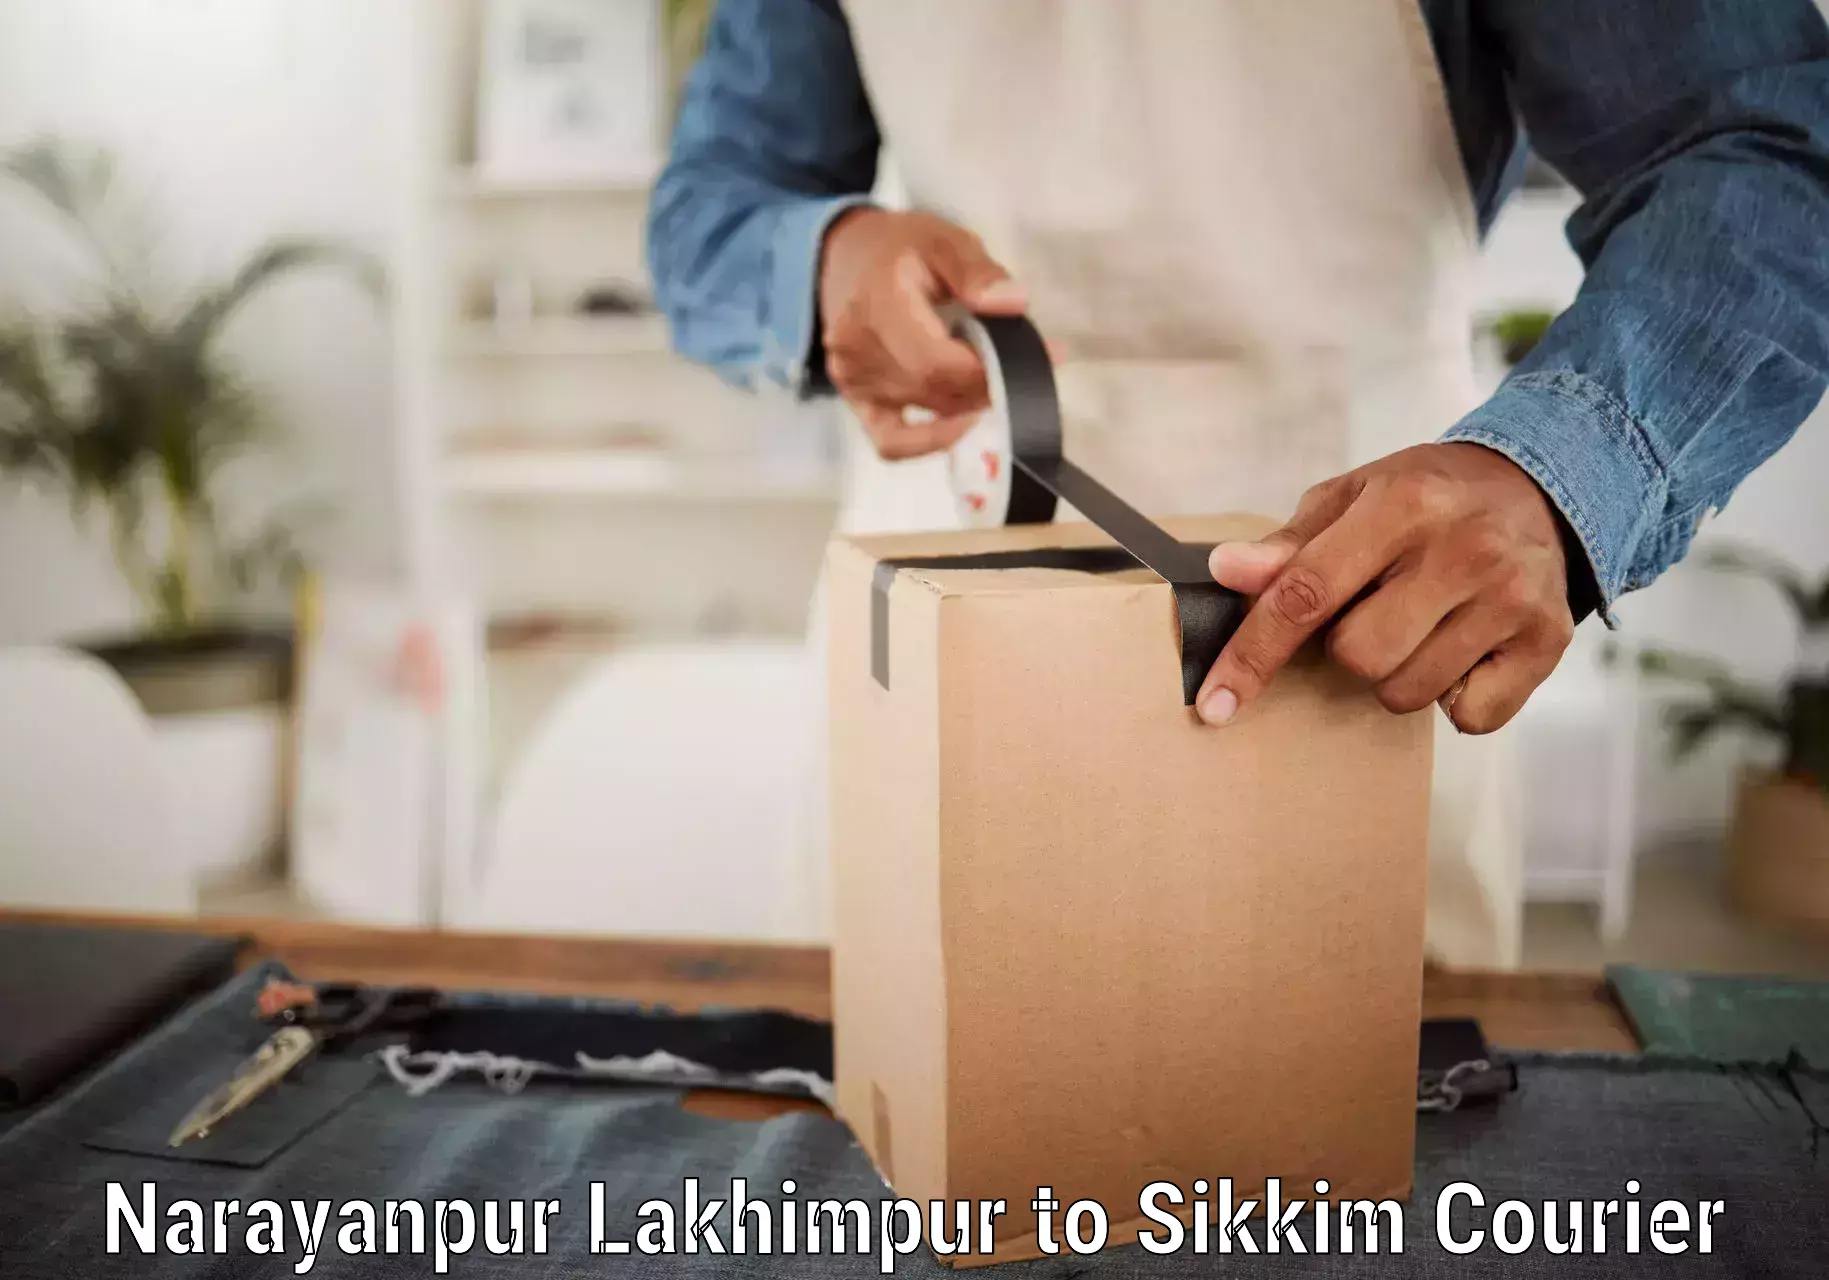 Efficient order fulfillment Narayanpur Lakhimpur to Sikkim